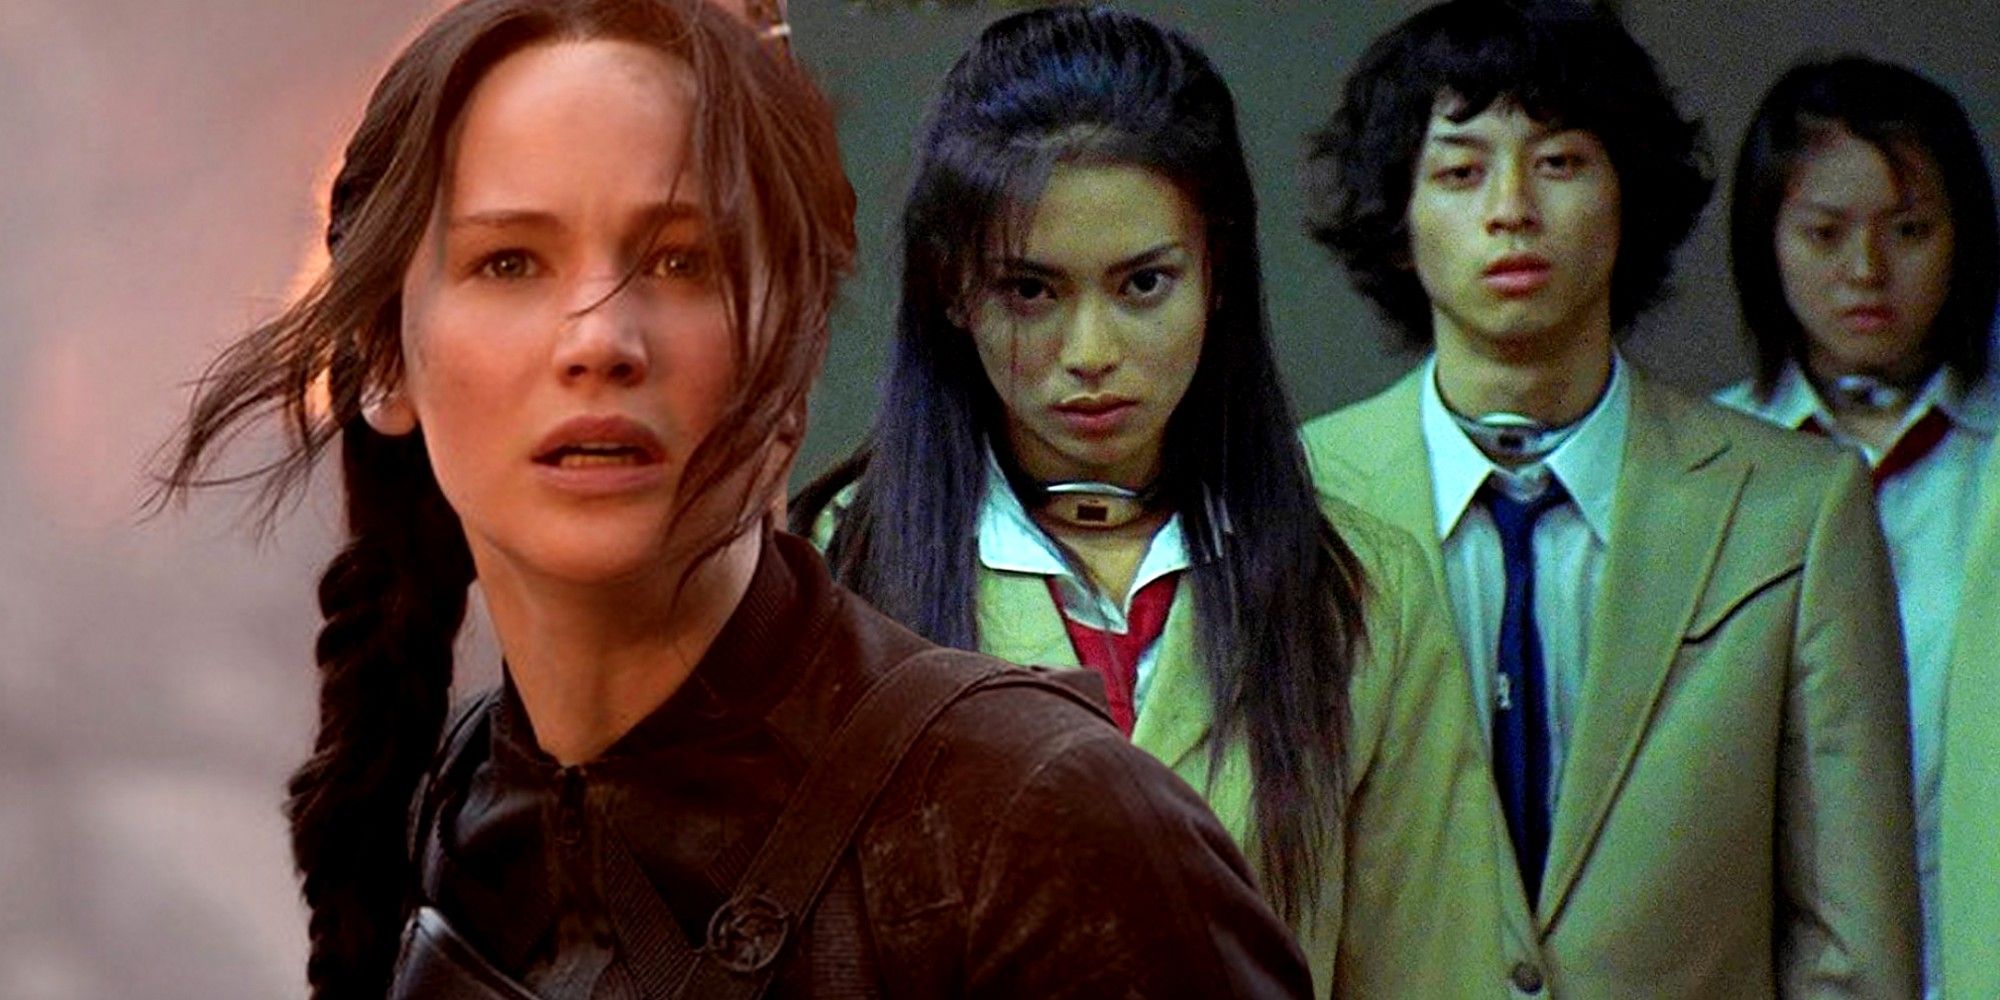 Katnis Everdeen from The Hunger Games imposed over Battle Royale cast